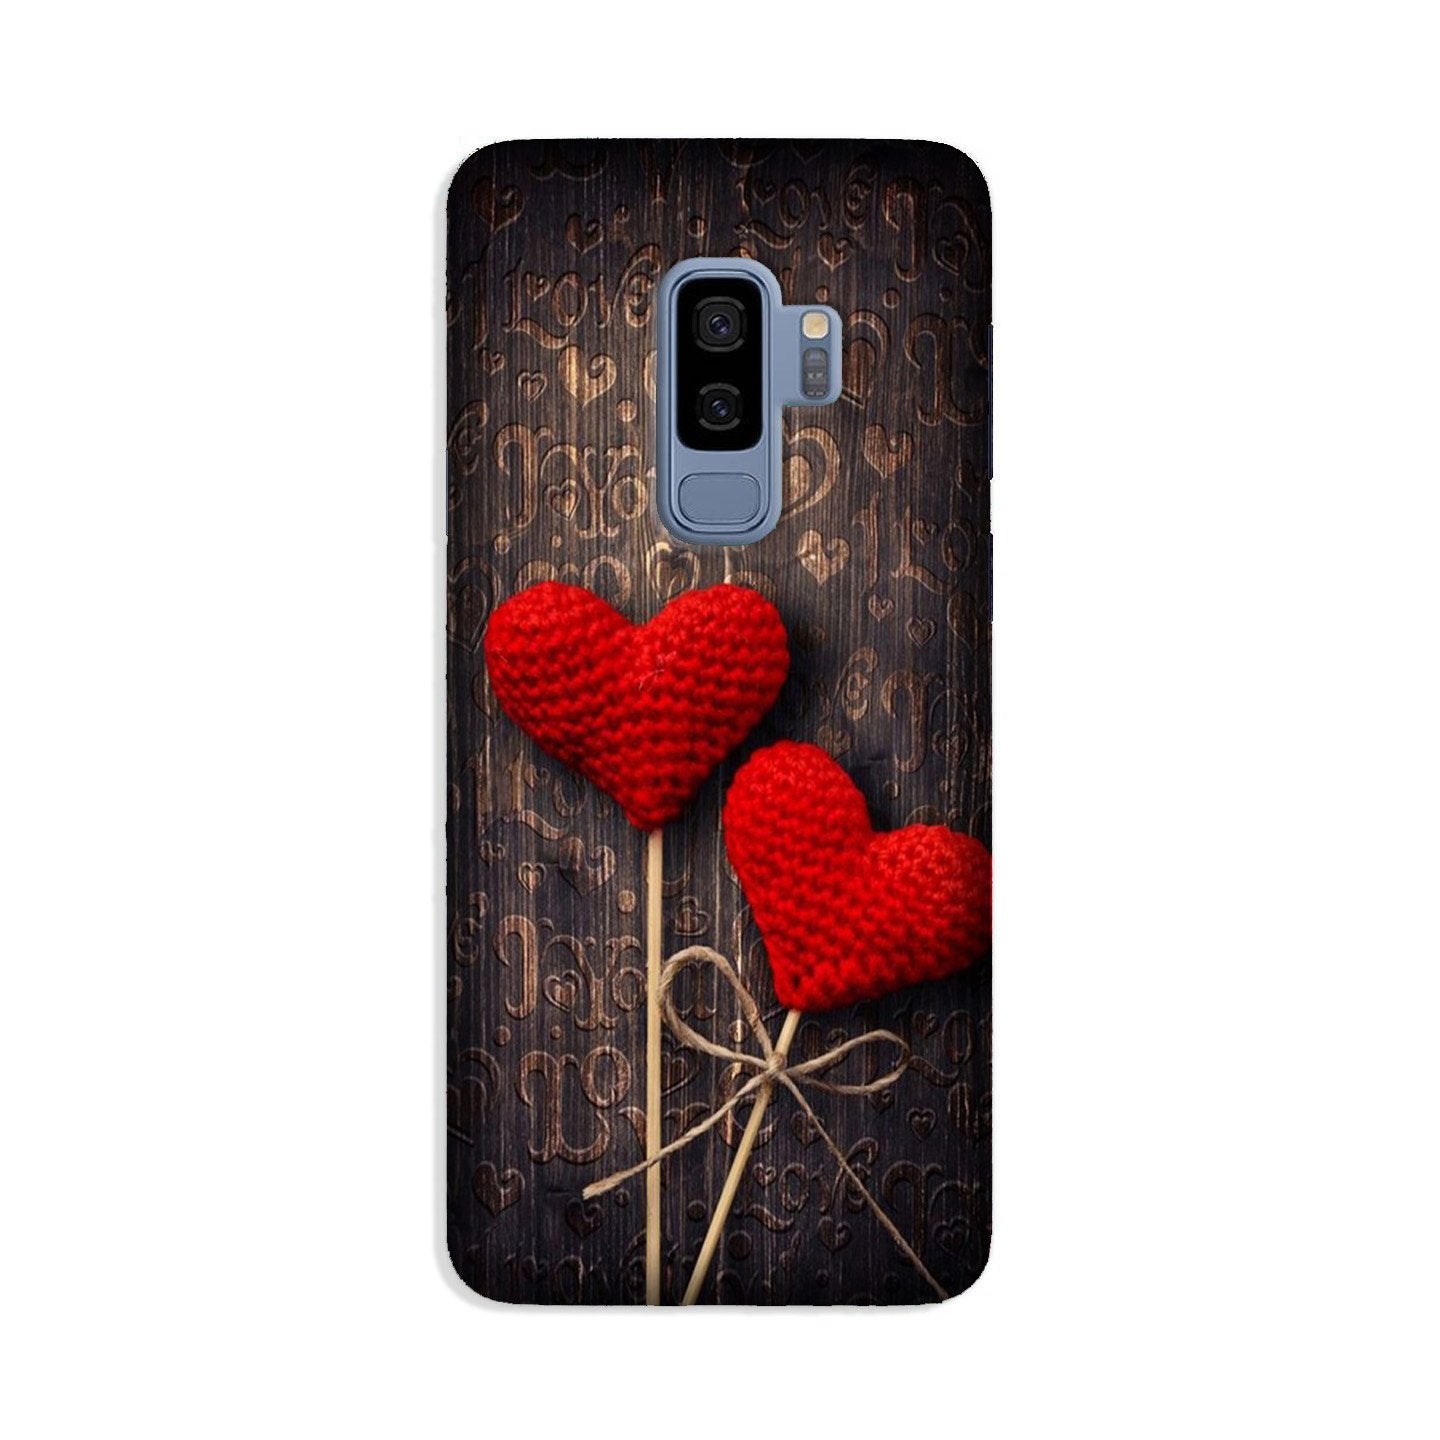 Red Hearts Case for Galaxy S9 Plus